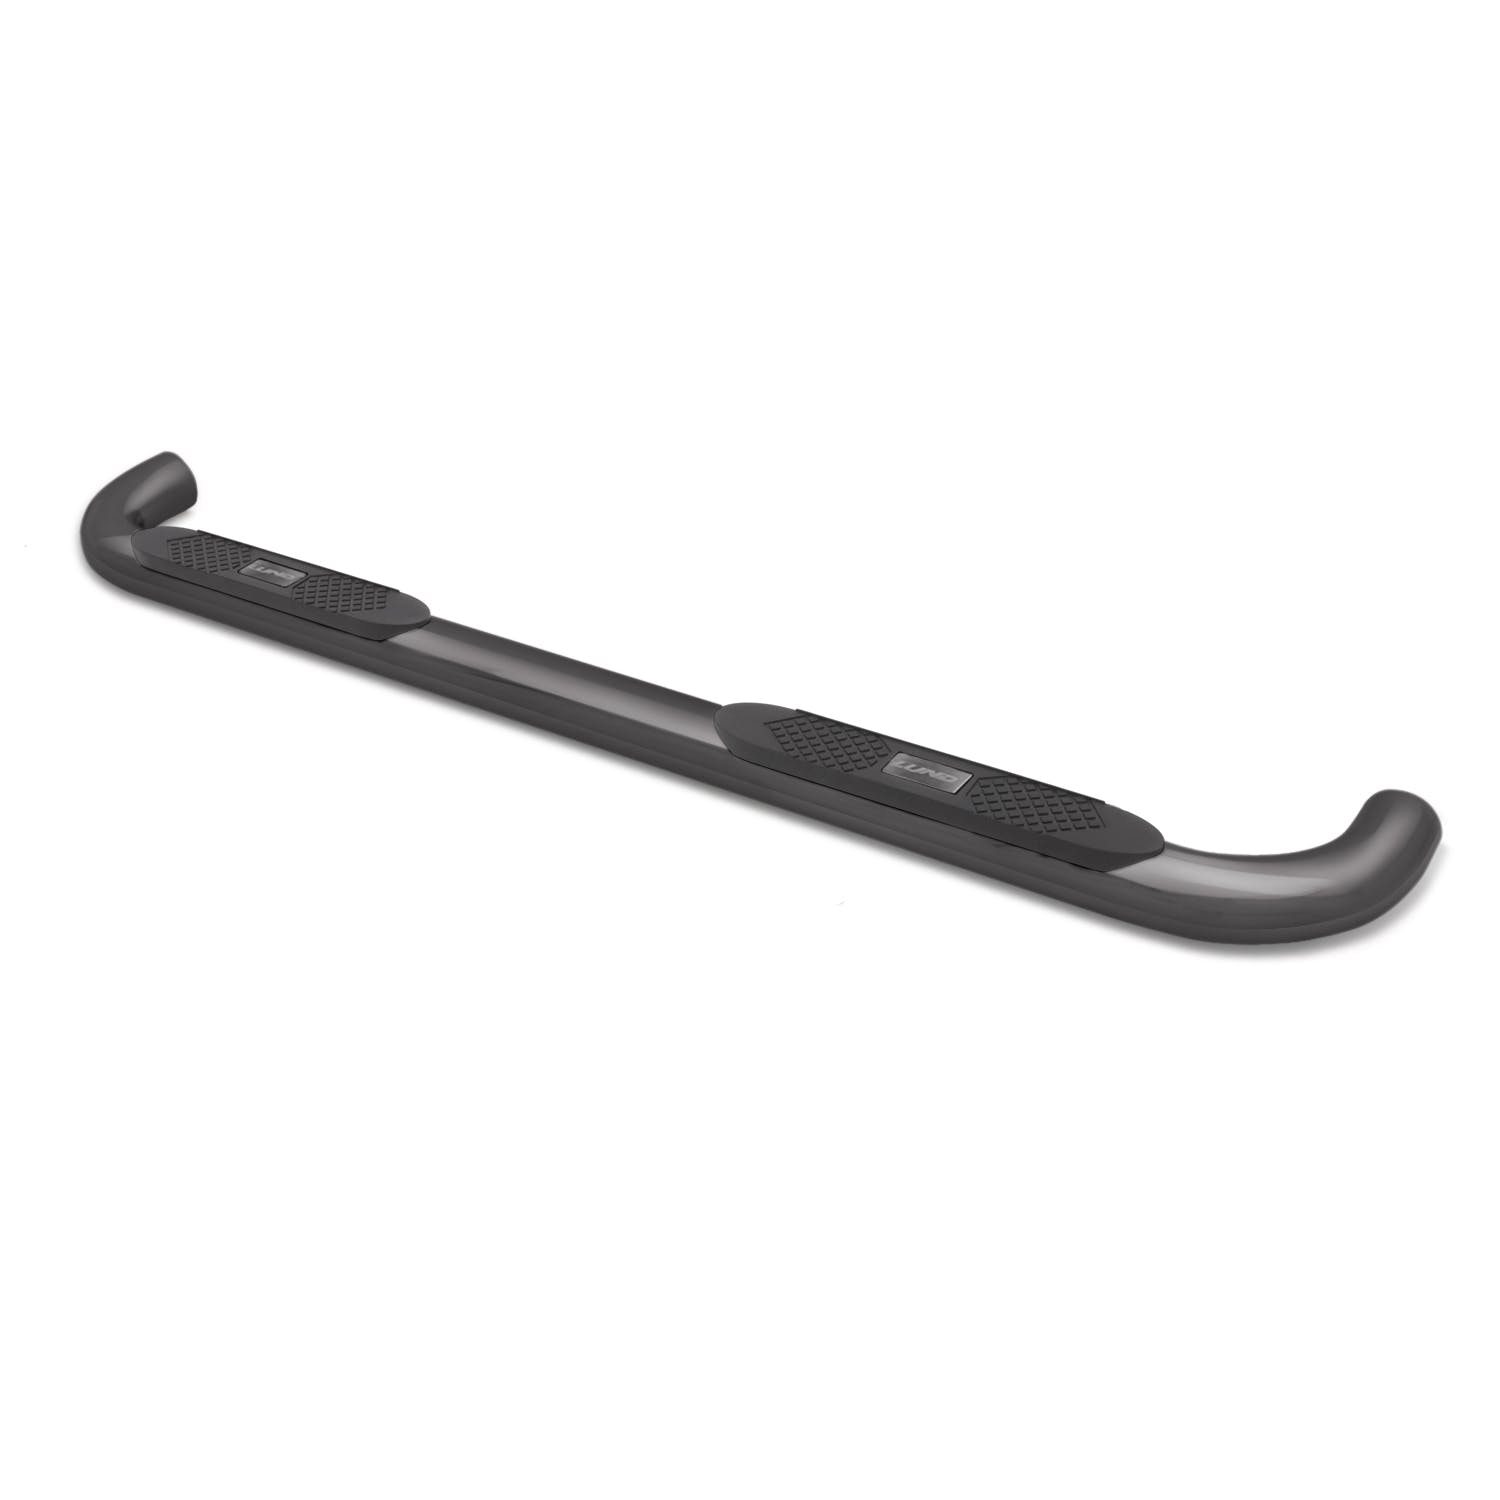 LUND 23491908 4 Inch Oval Curved Nerf Bar - Black 4 In OVAL CURVED STEEL